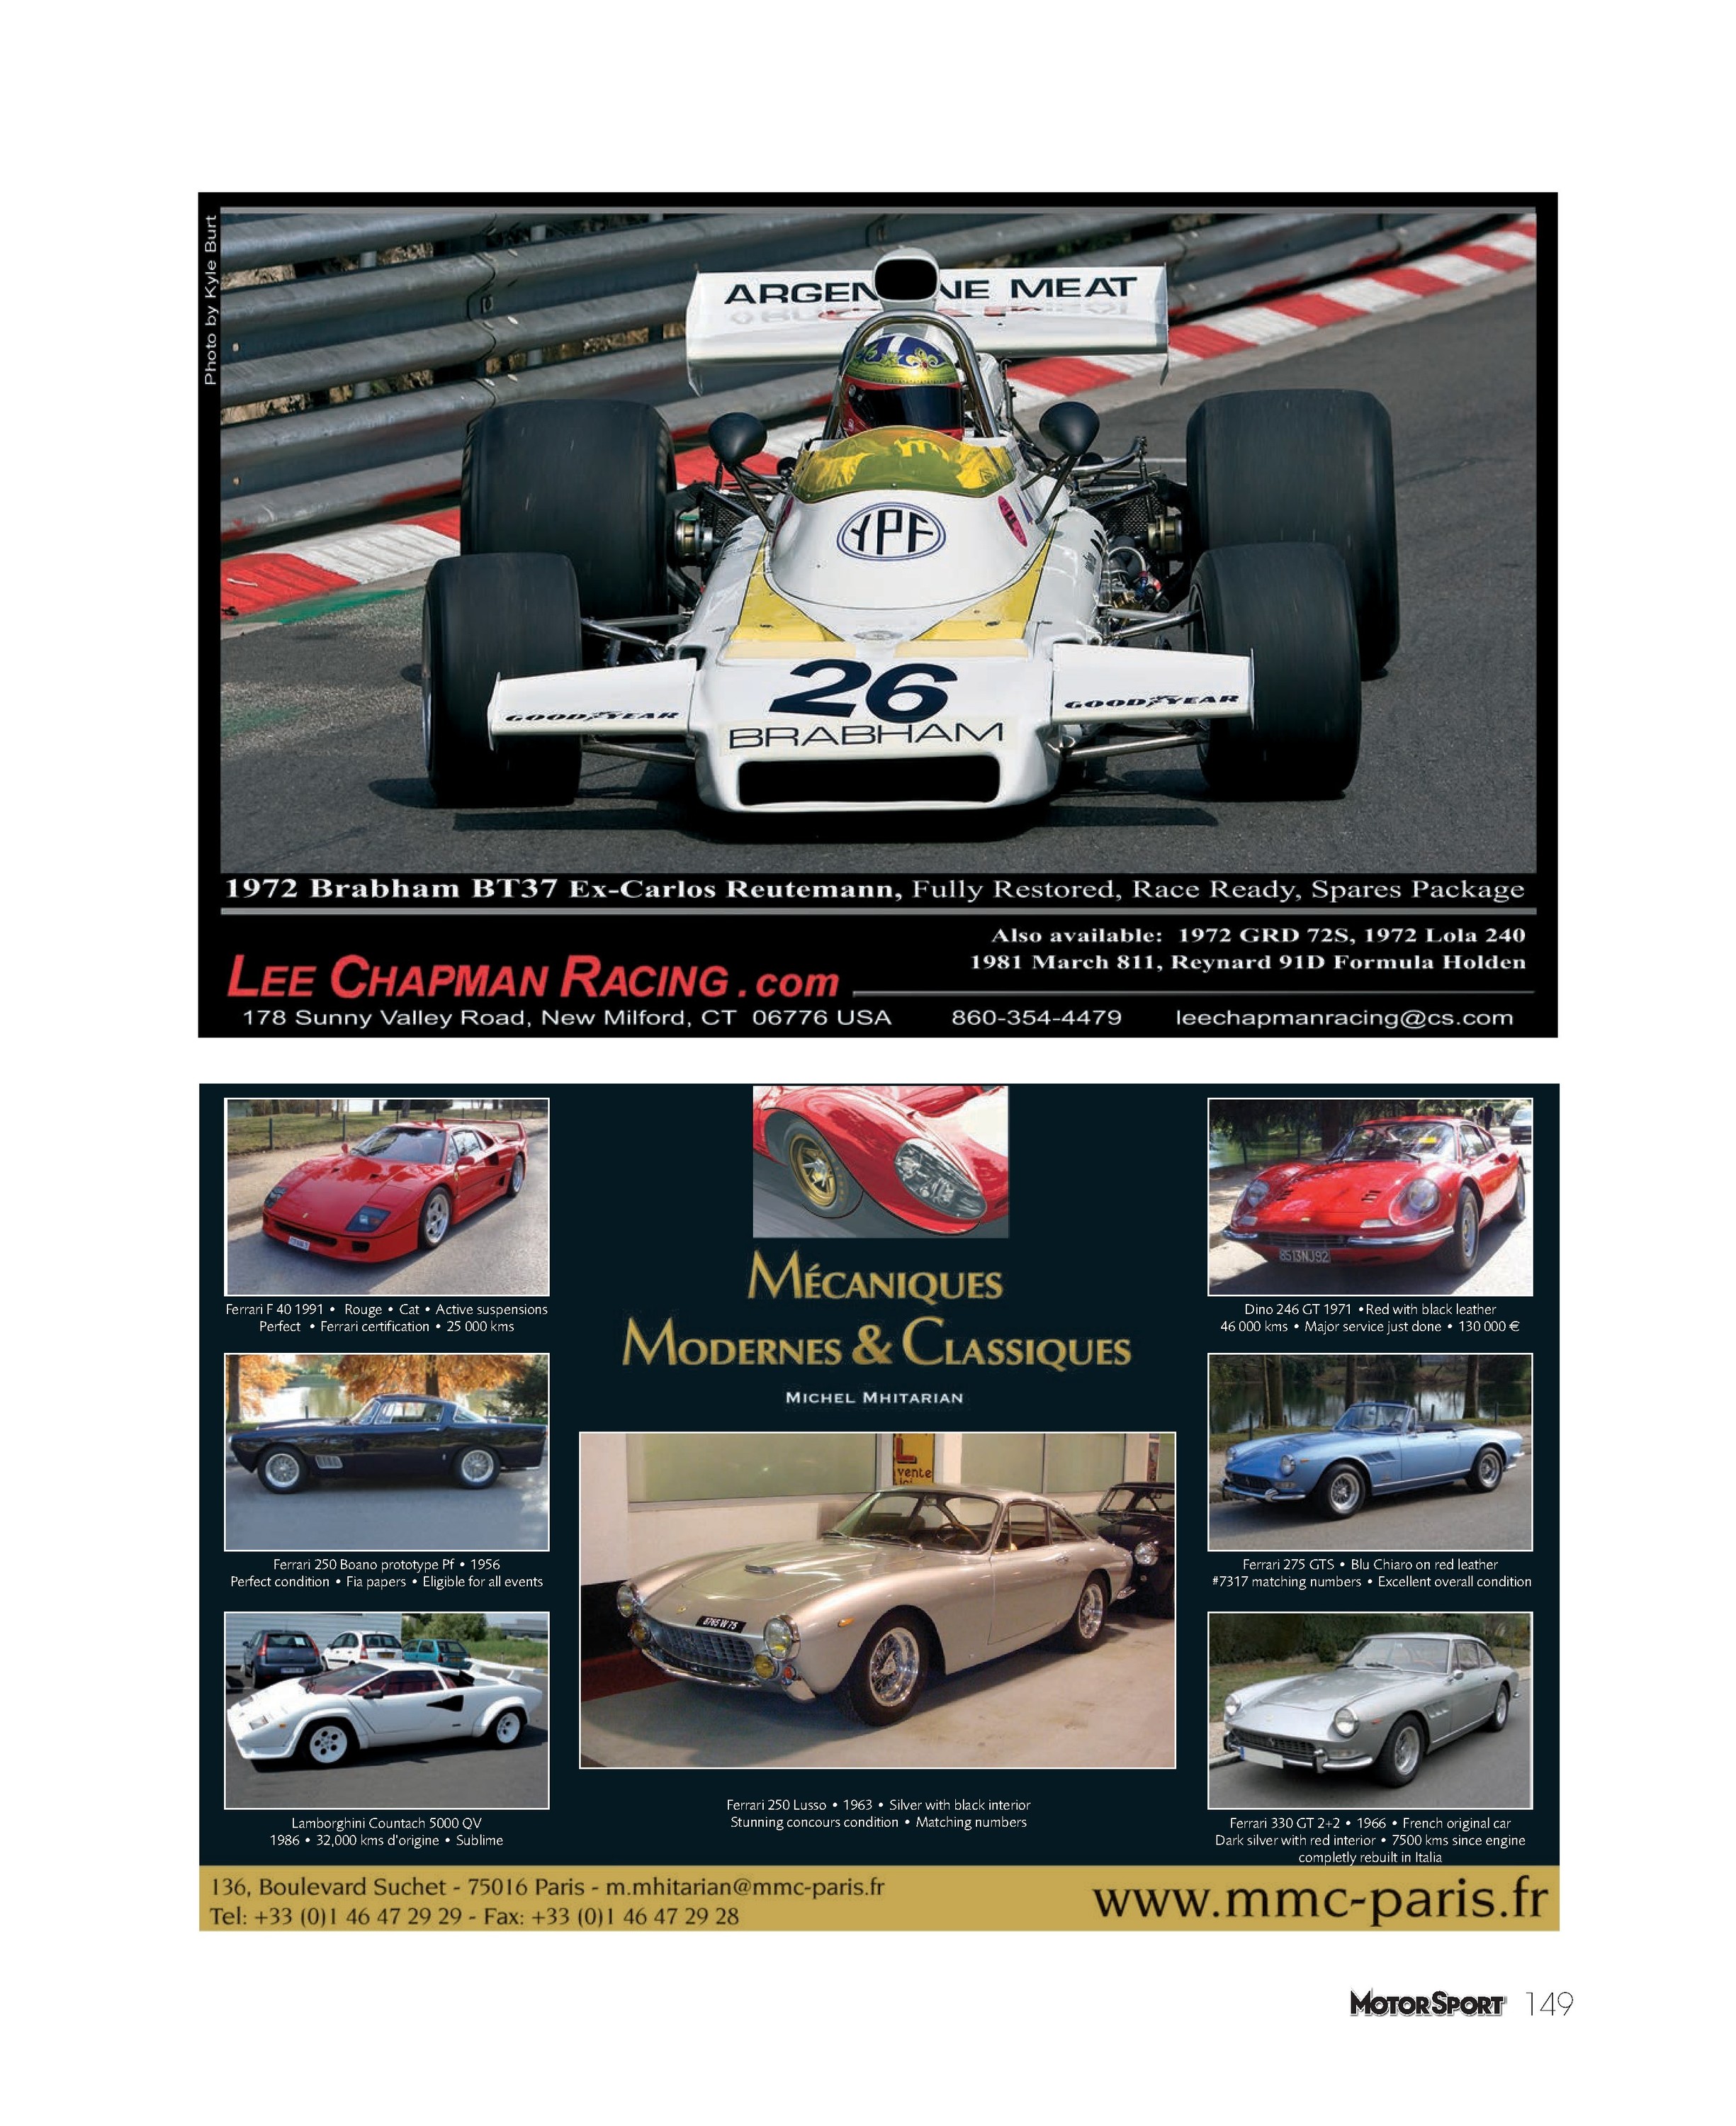 Keeping track of the BRDC'S star prizes June 2009 - Motor Sport Magazine